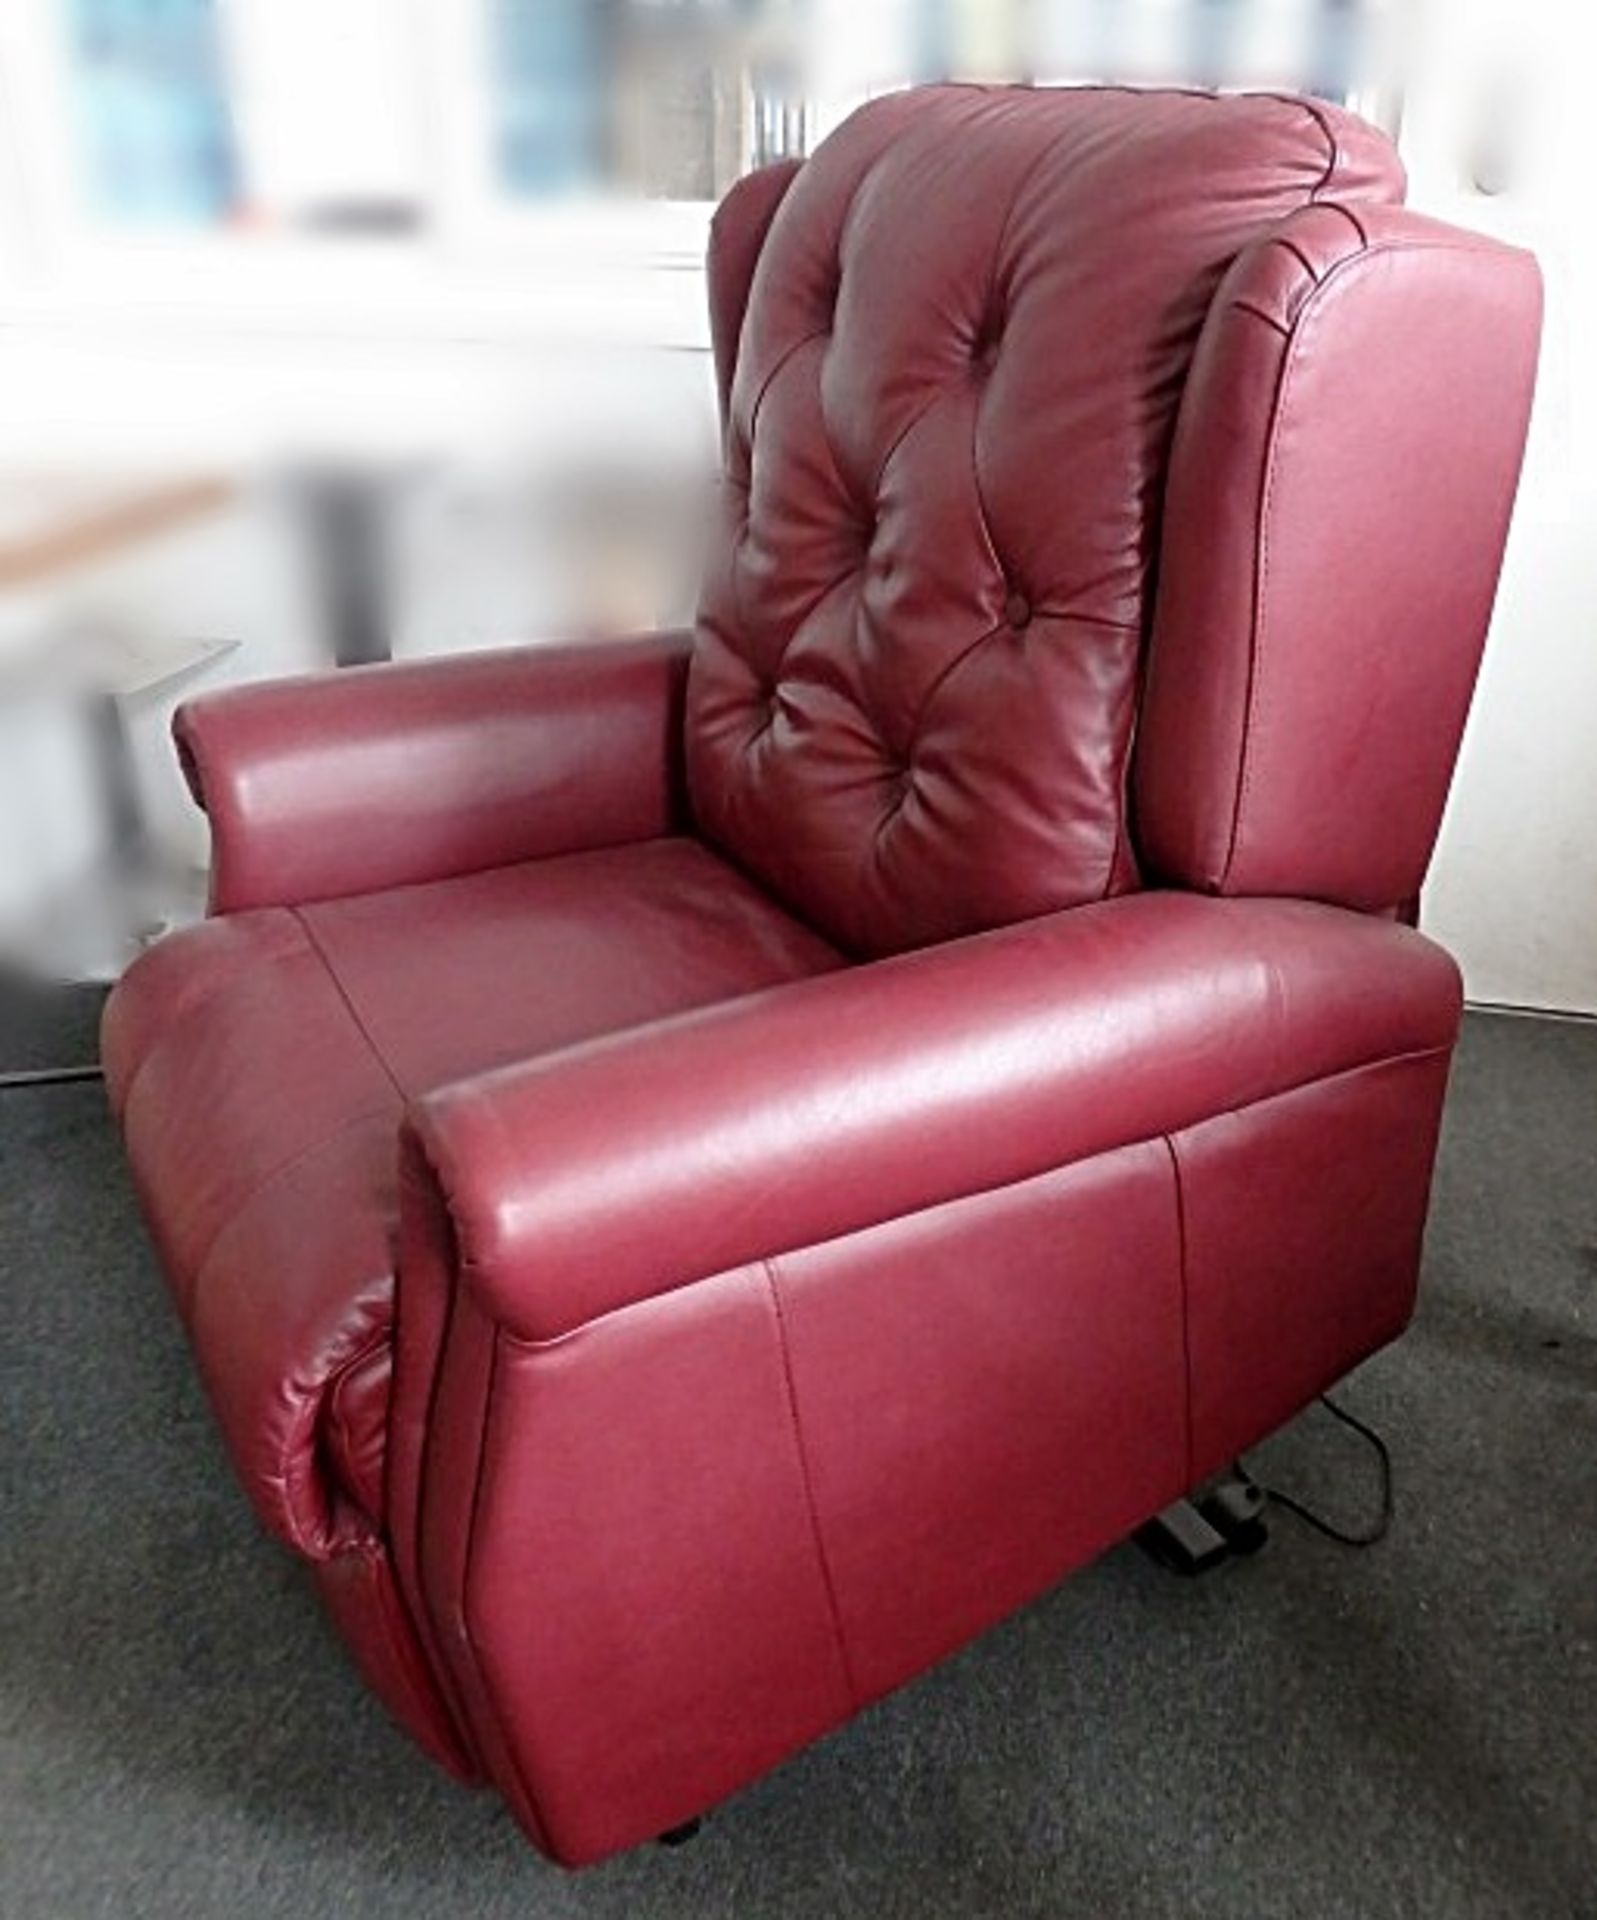 1 x "Beatrice" Riser Recliner Chair By TCS - Upholstered In Genuine Italian Leather (Red) - Pocket - Image 2 of 9